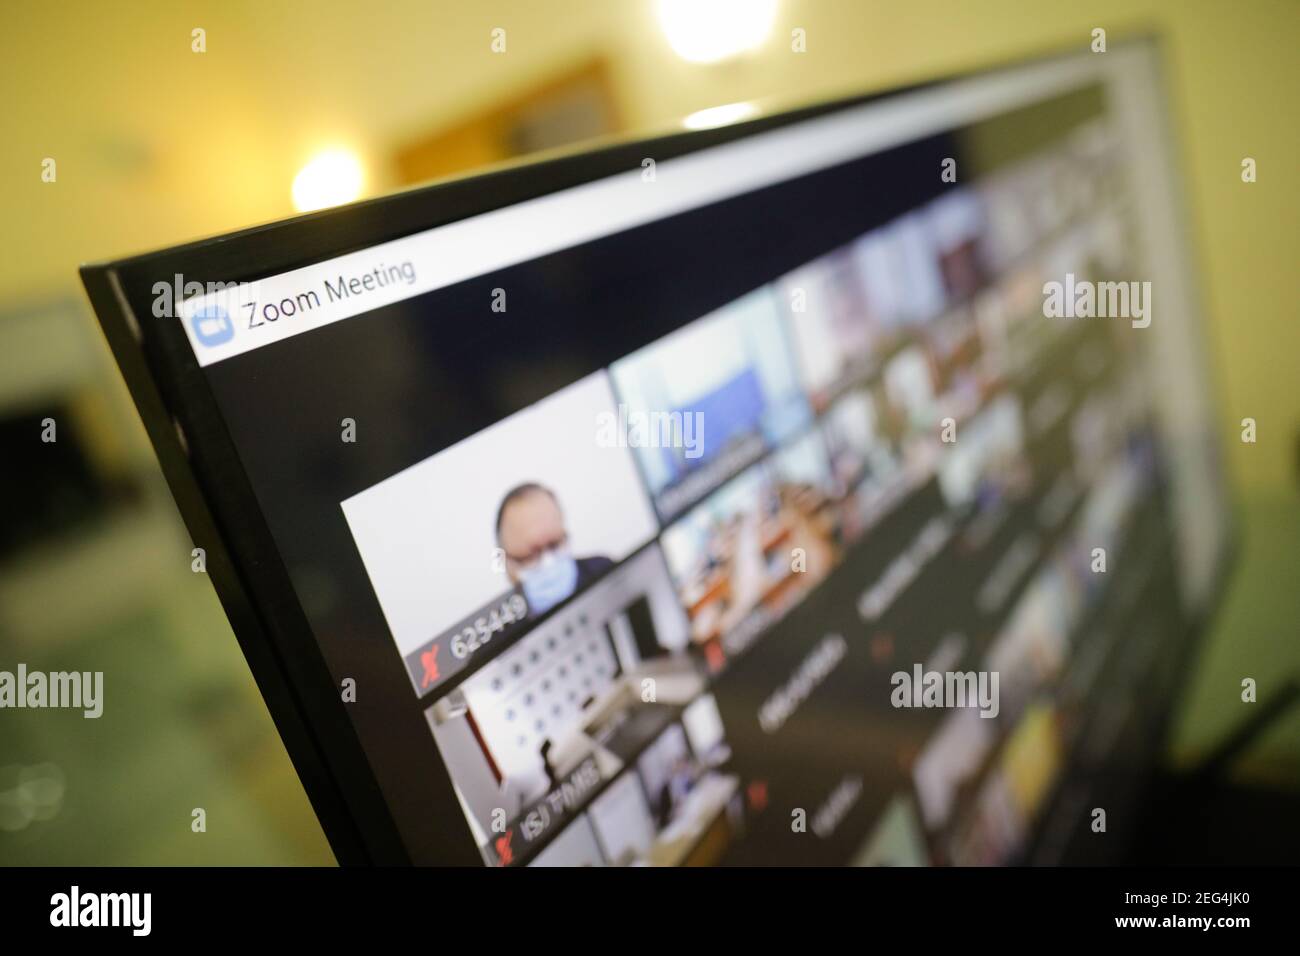 Bucharest, Romania - February 4, 2021: Shallow depth of field image (selective focus) with the Zoom video conference app/site - work from home during Stock Photo